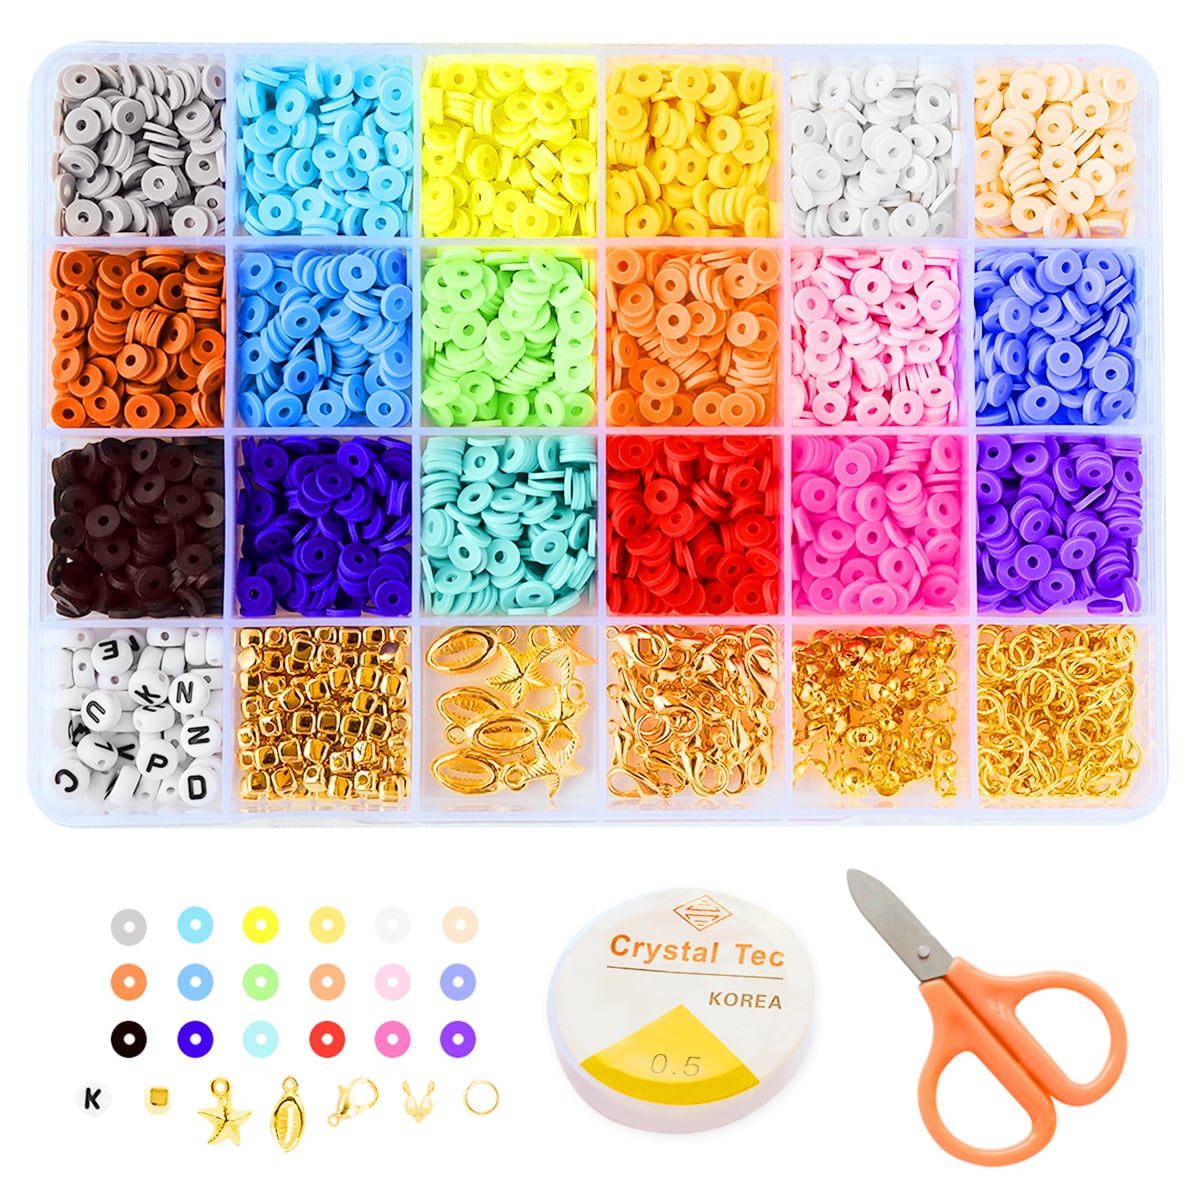 6000Pcs Clay Beads for Bracelets Jewelry Making,24Colors 6mm Flat Round  Polymer Clay Spacer Beads